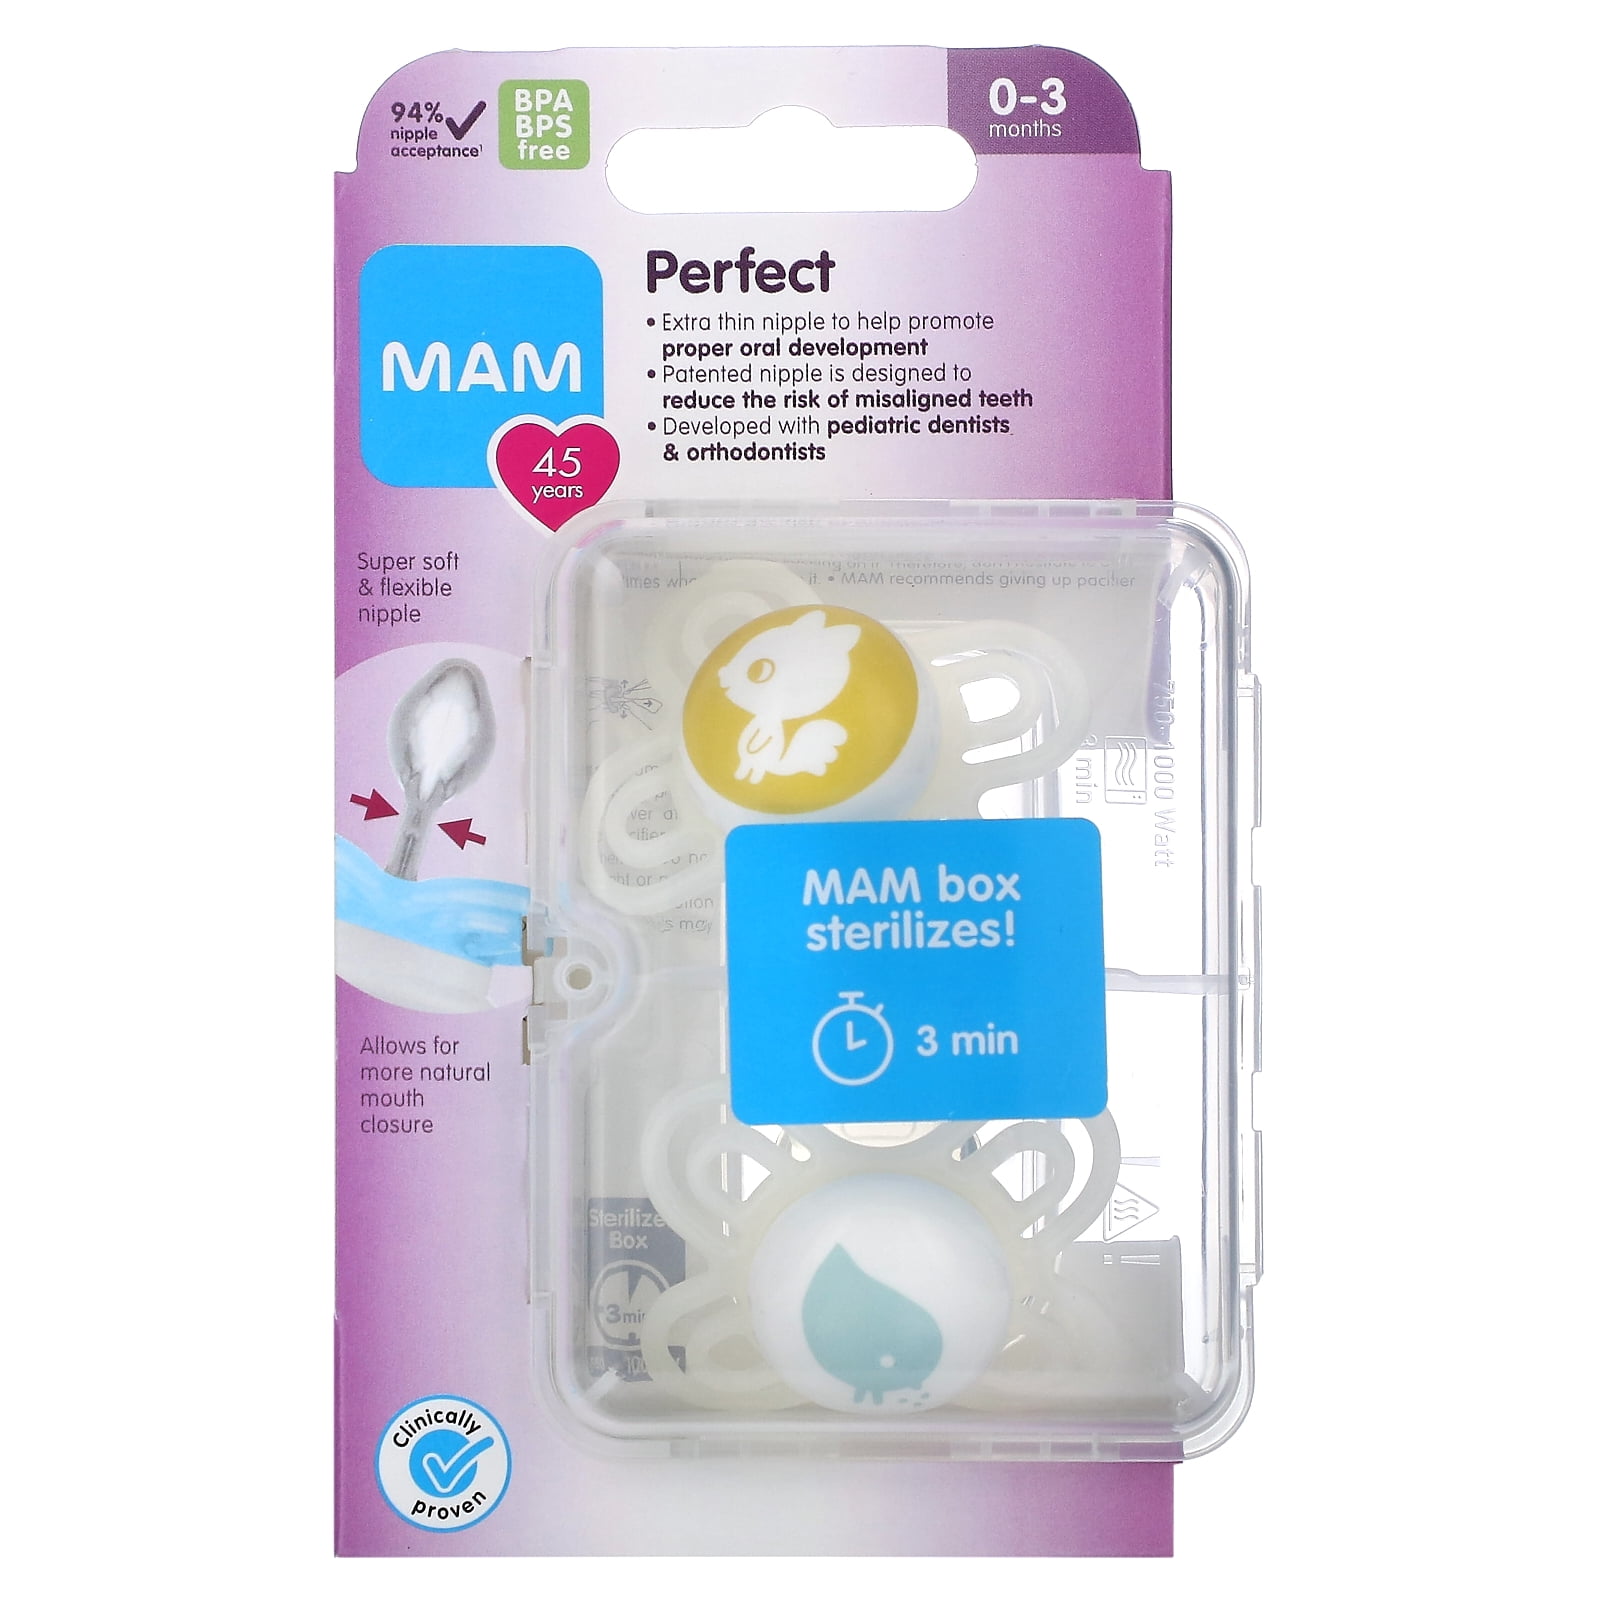 MAM Perfect Baby Pacifier, Patented Nipple, Developed with Pediatric  Dentists & Orthodontists, Unisex, 0-3 (Pack of 2)